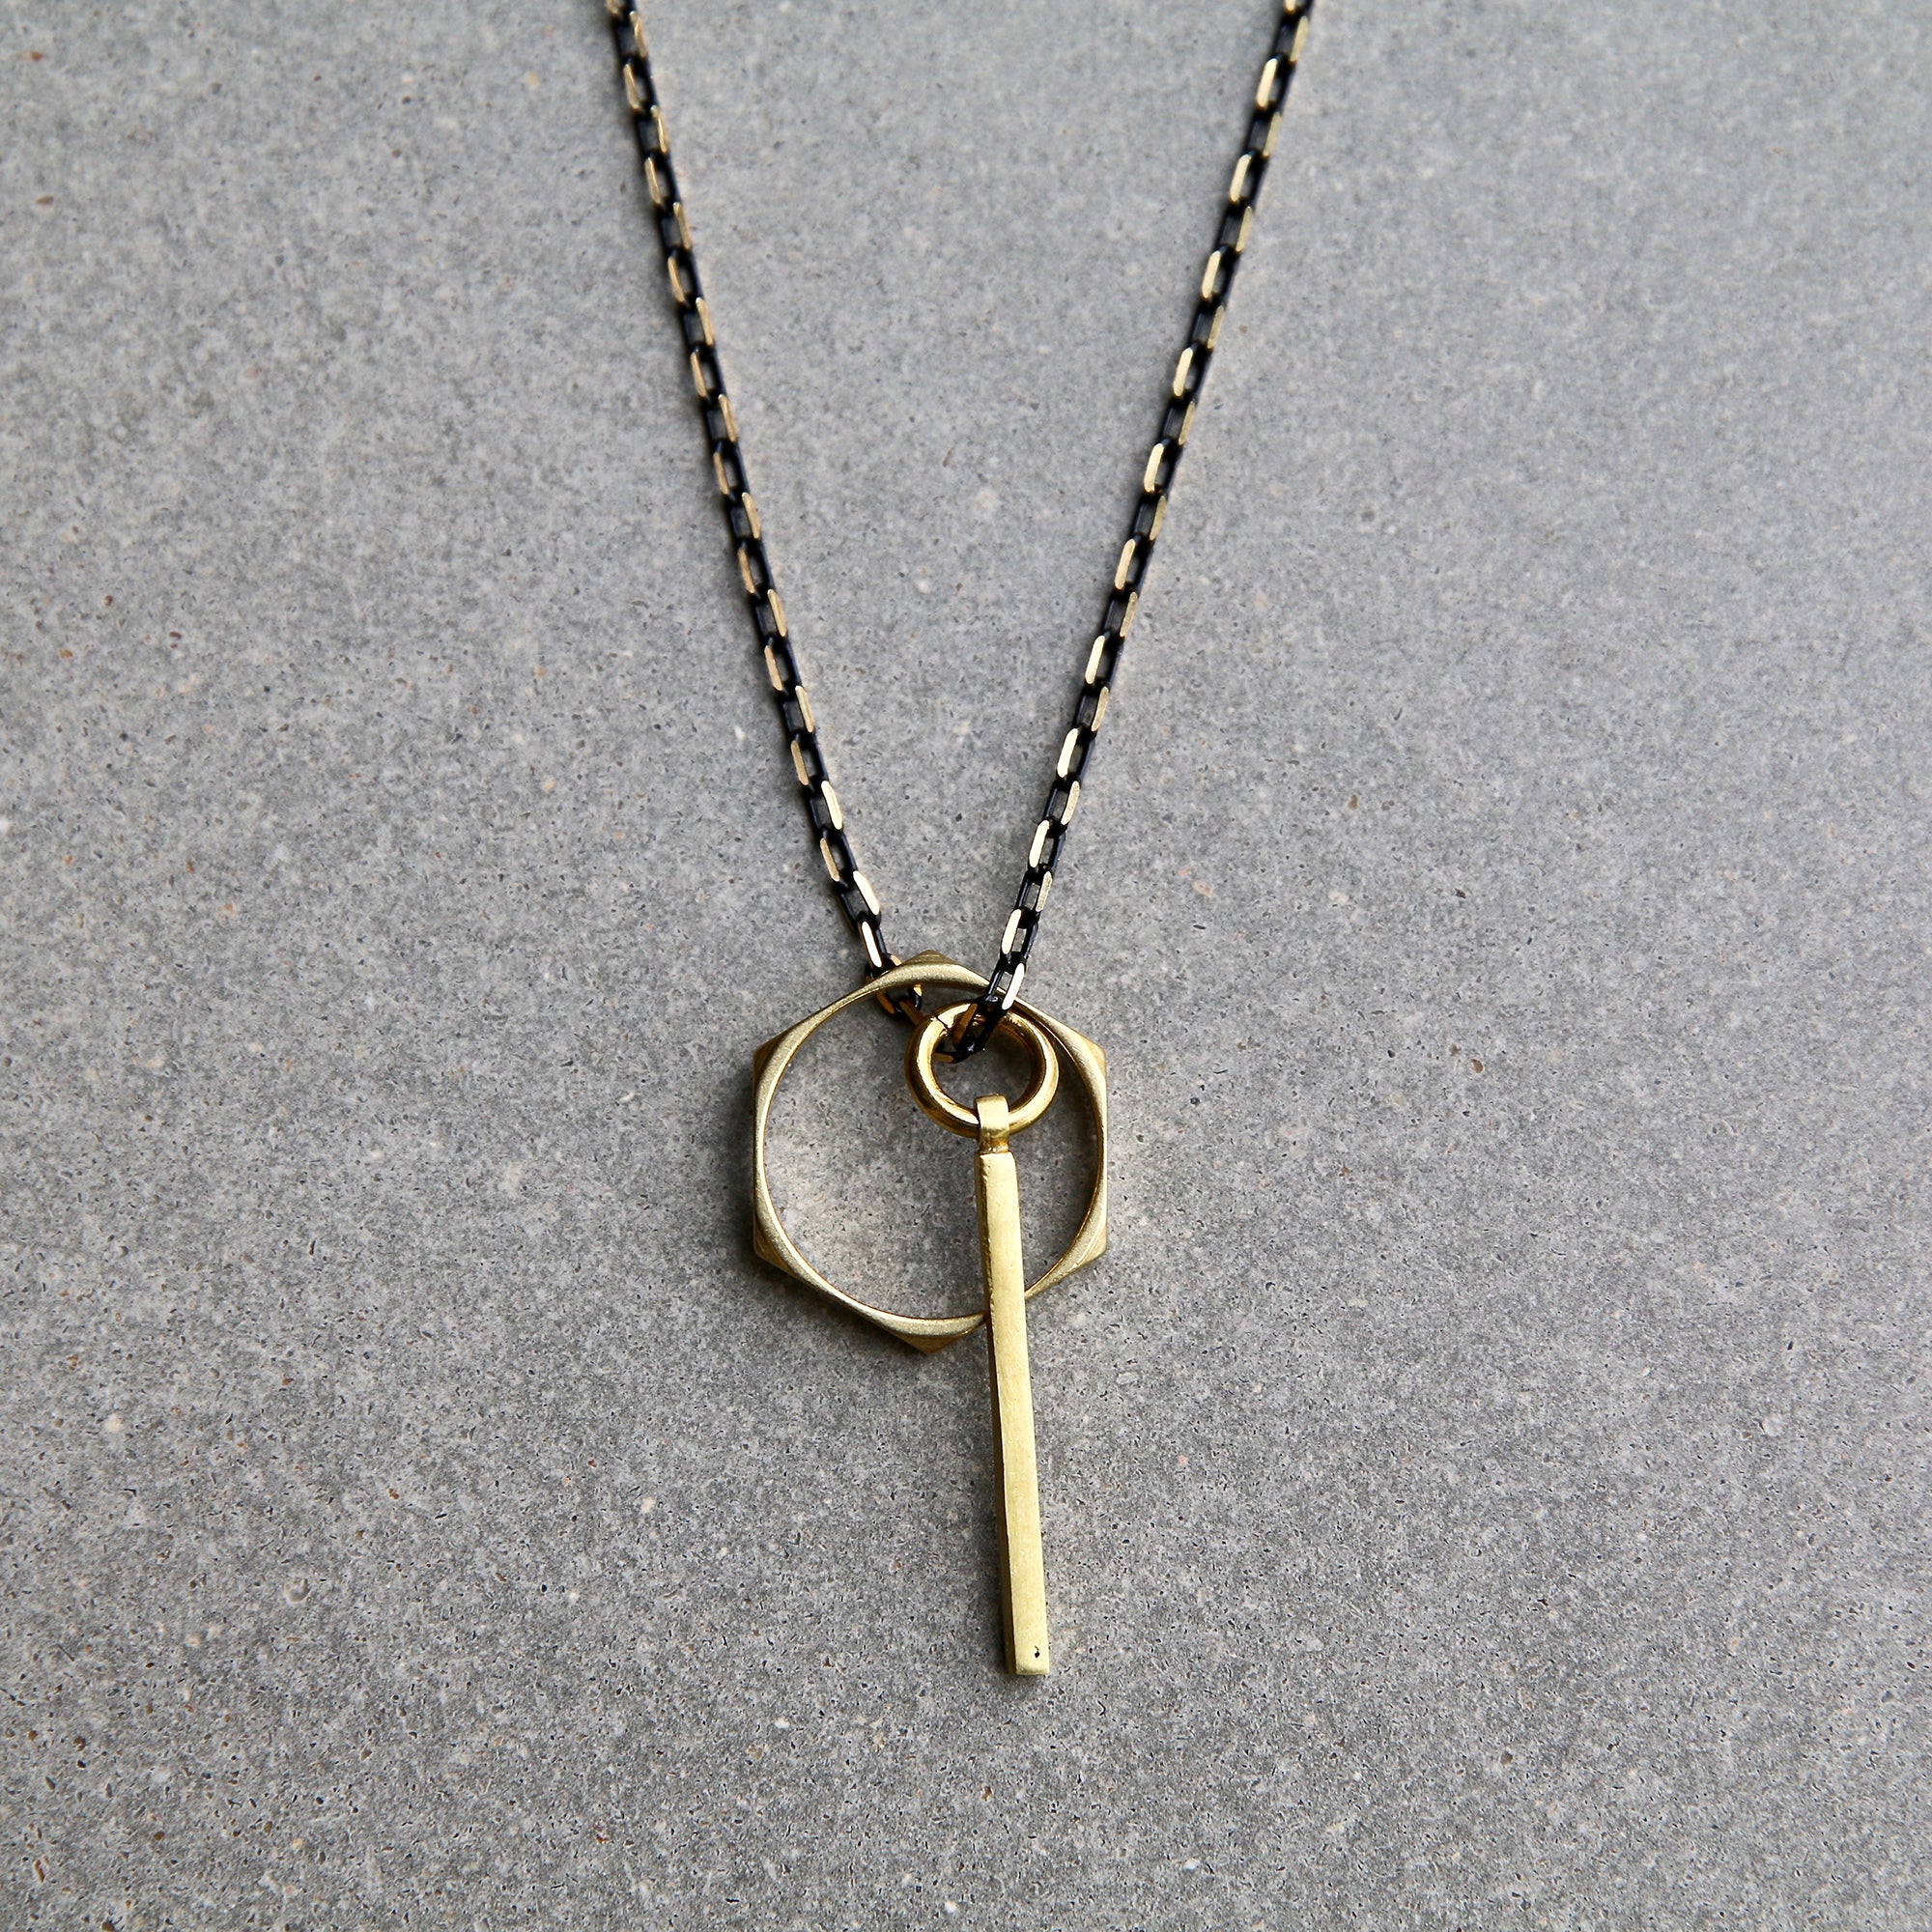 Opposites Attract Necklace - Brass